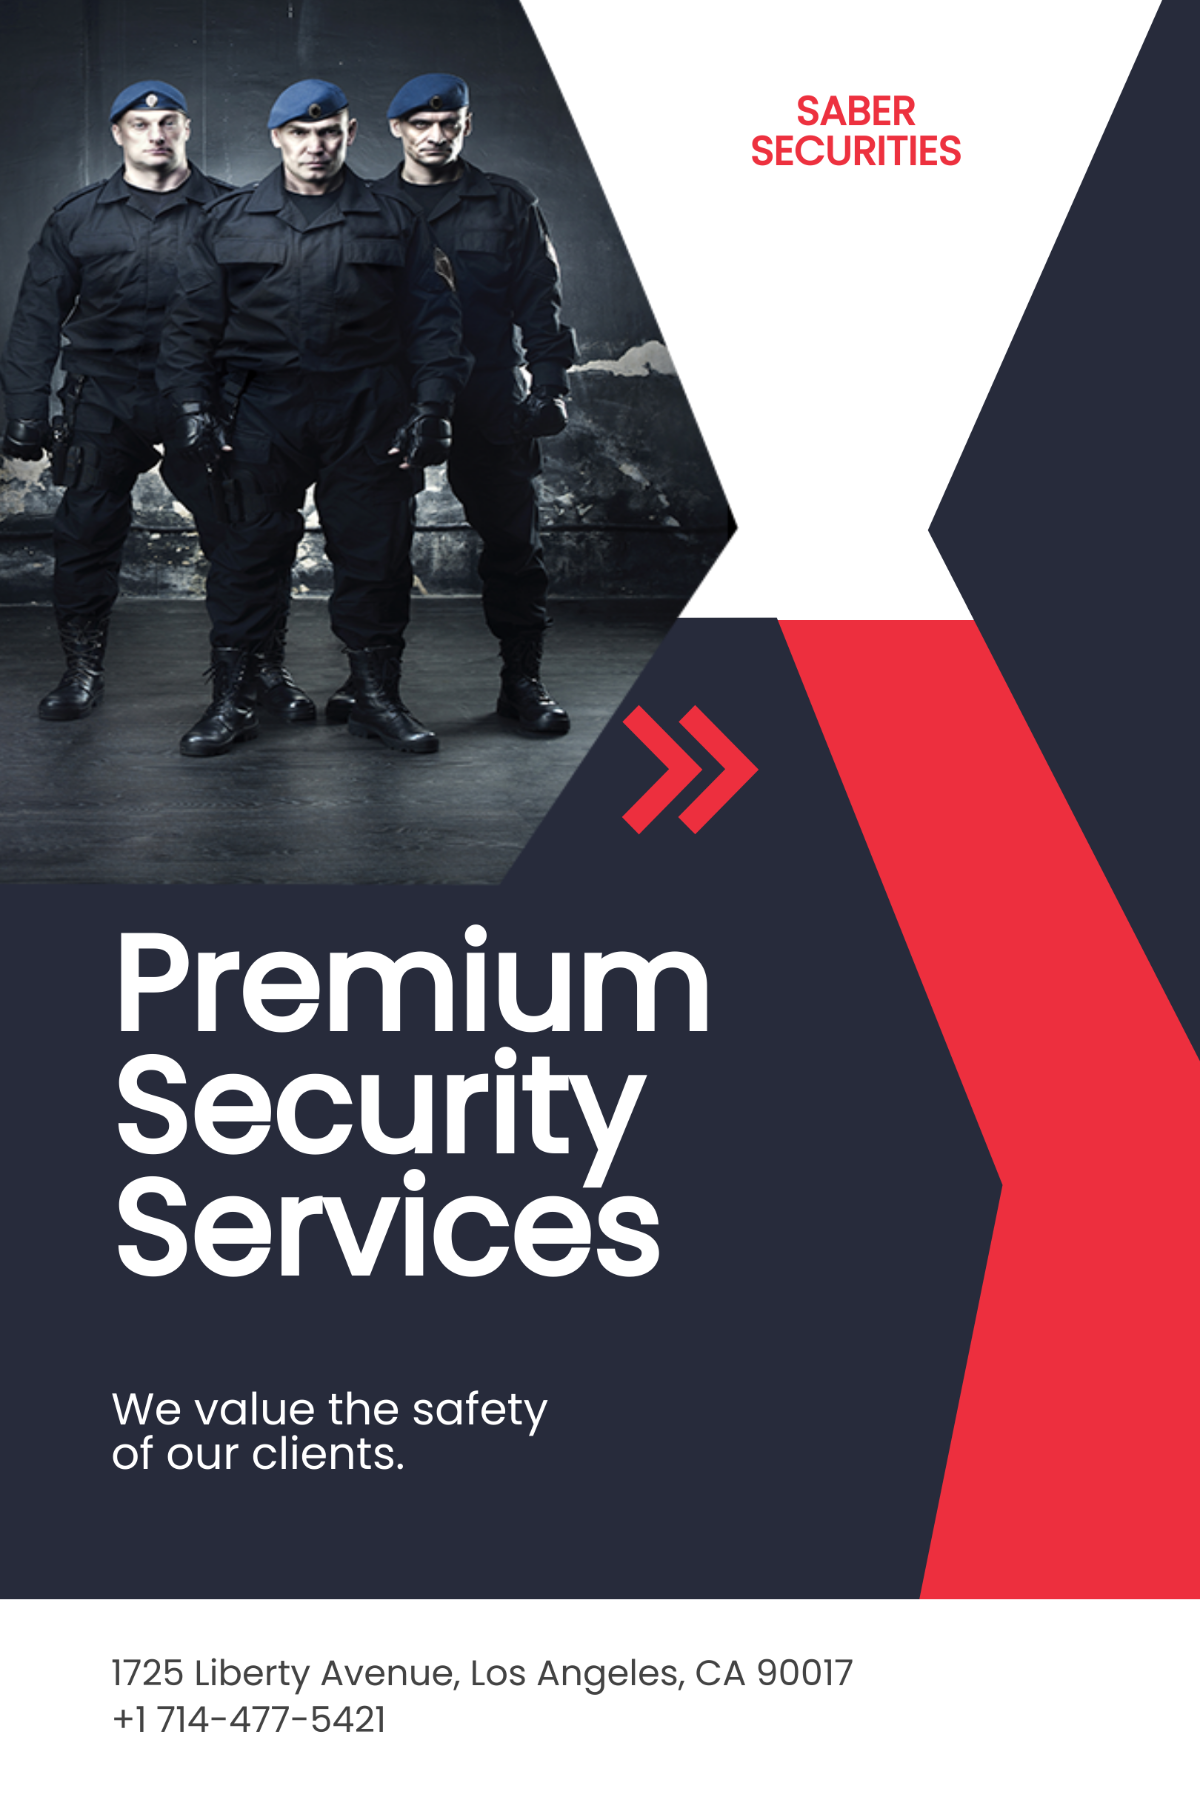 Security Guard Services Tumblr Post